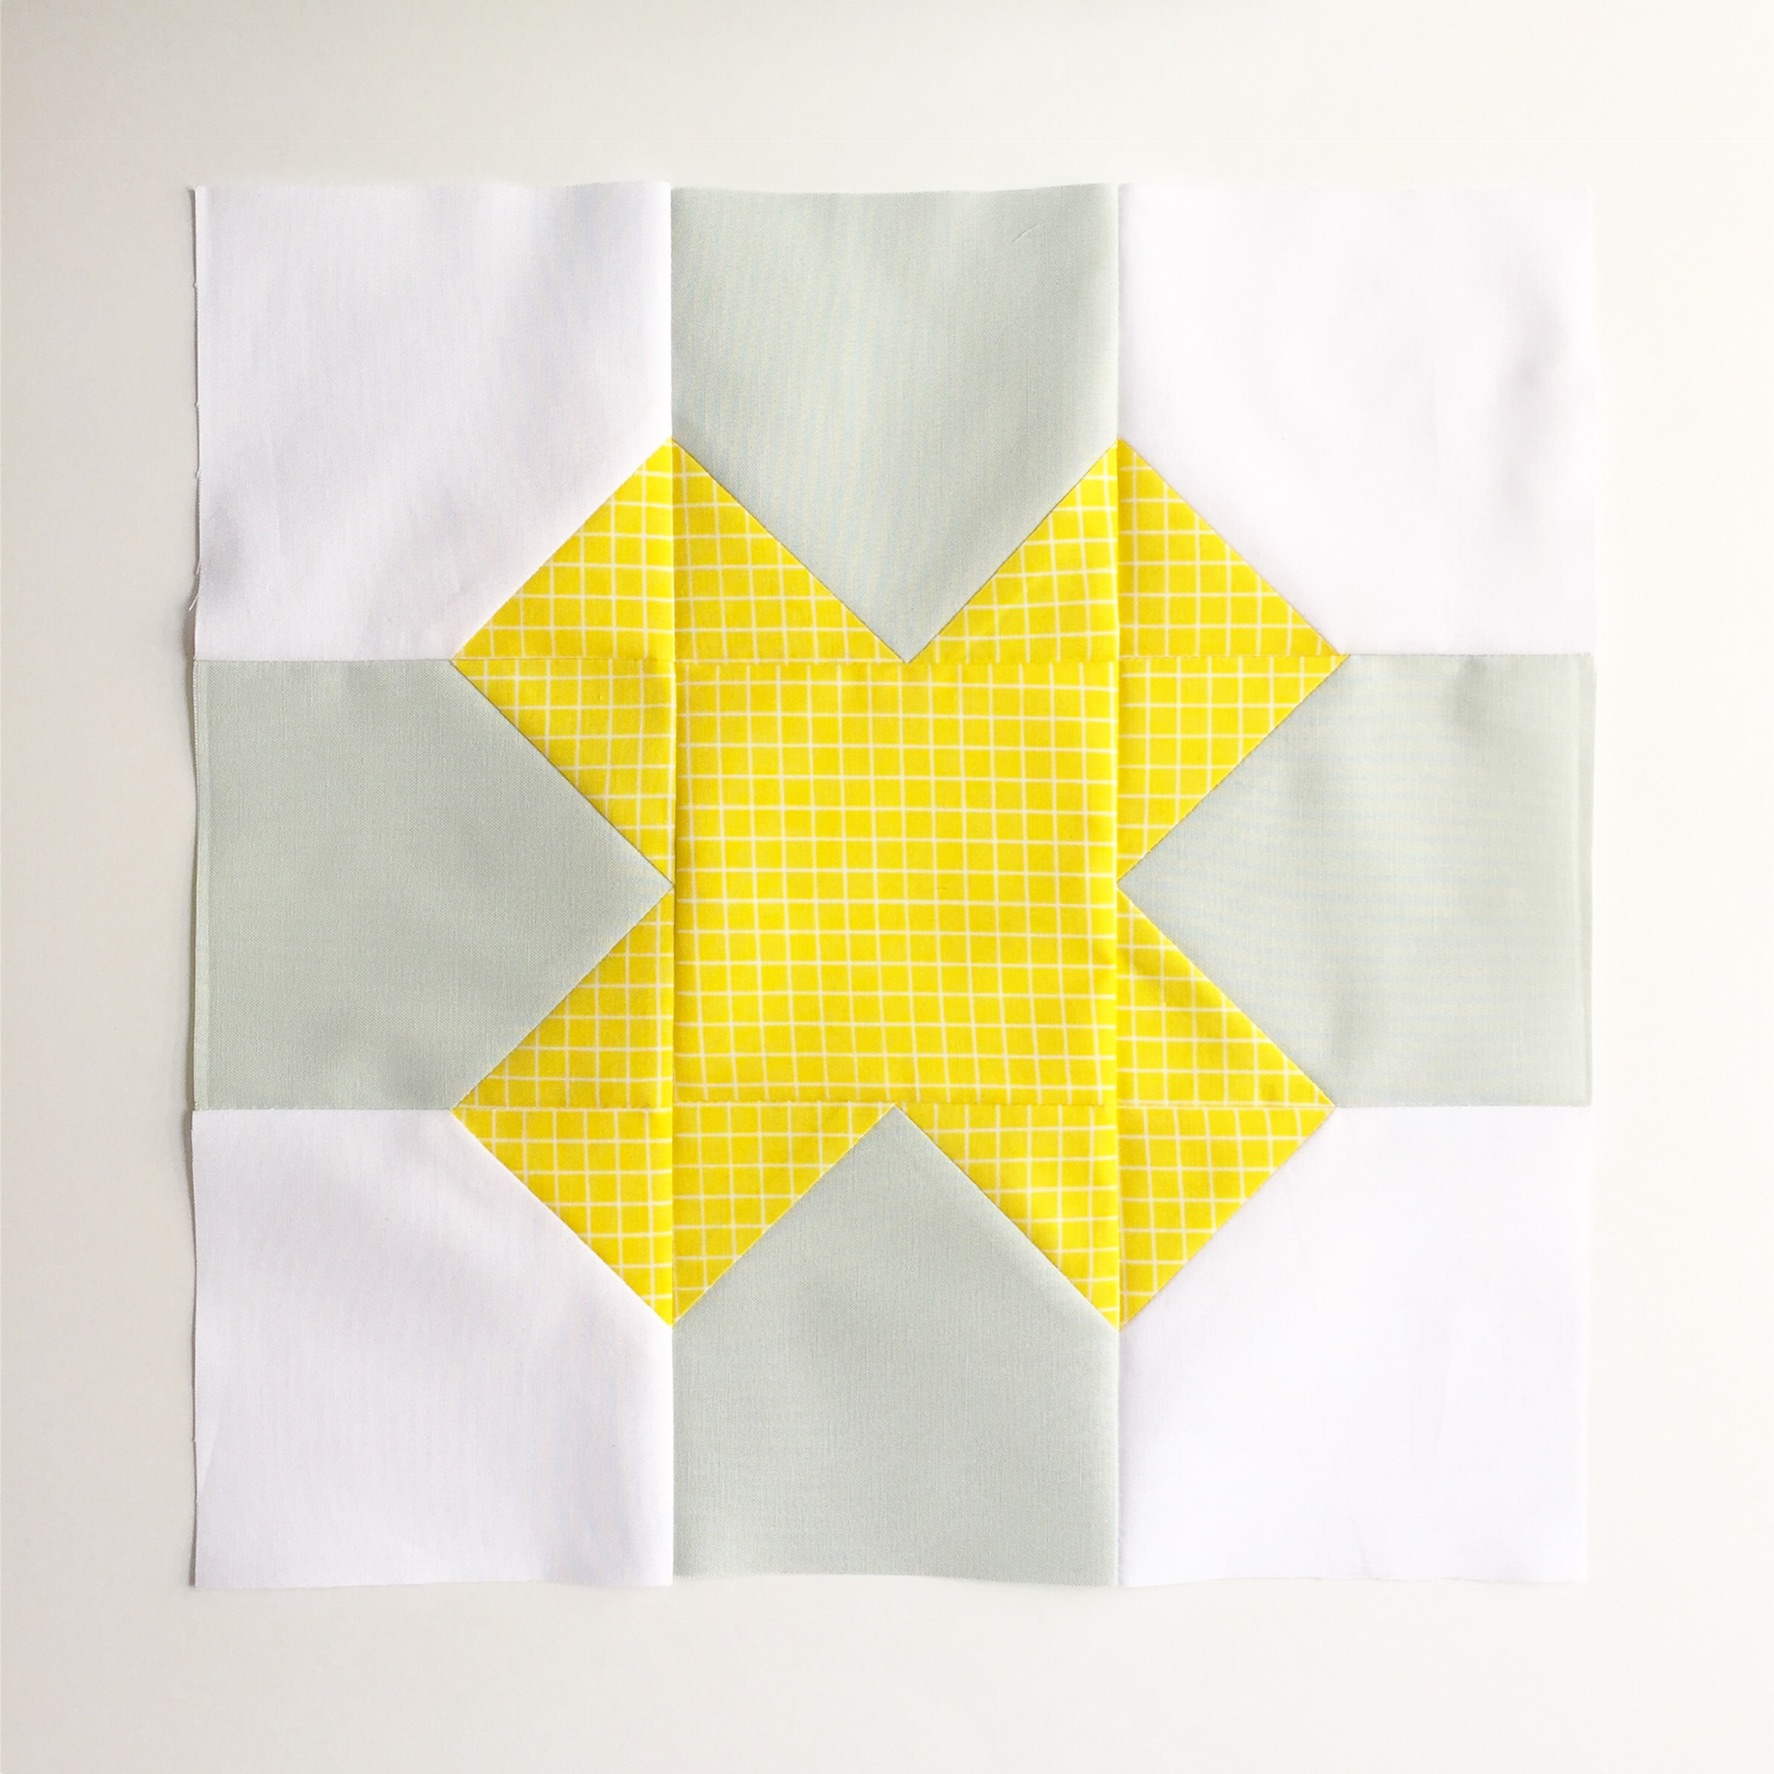 blossom-heart-quilts-beehive-block